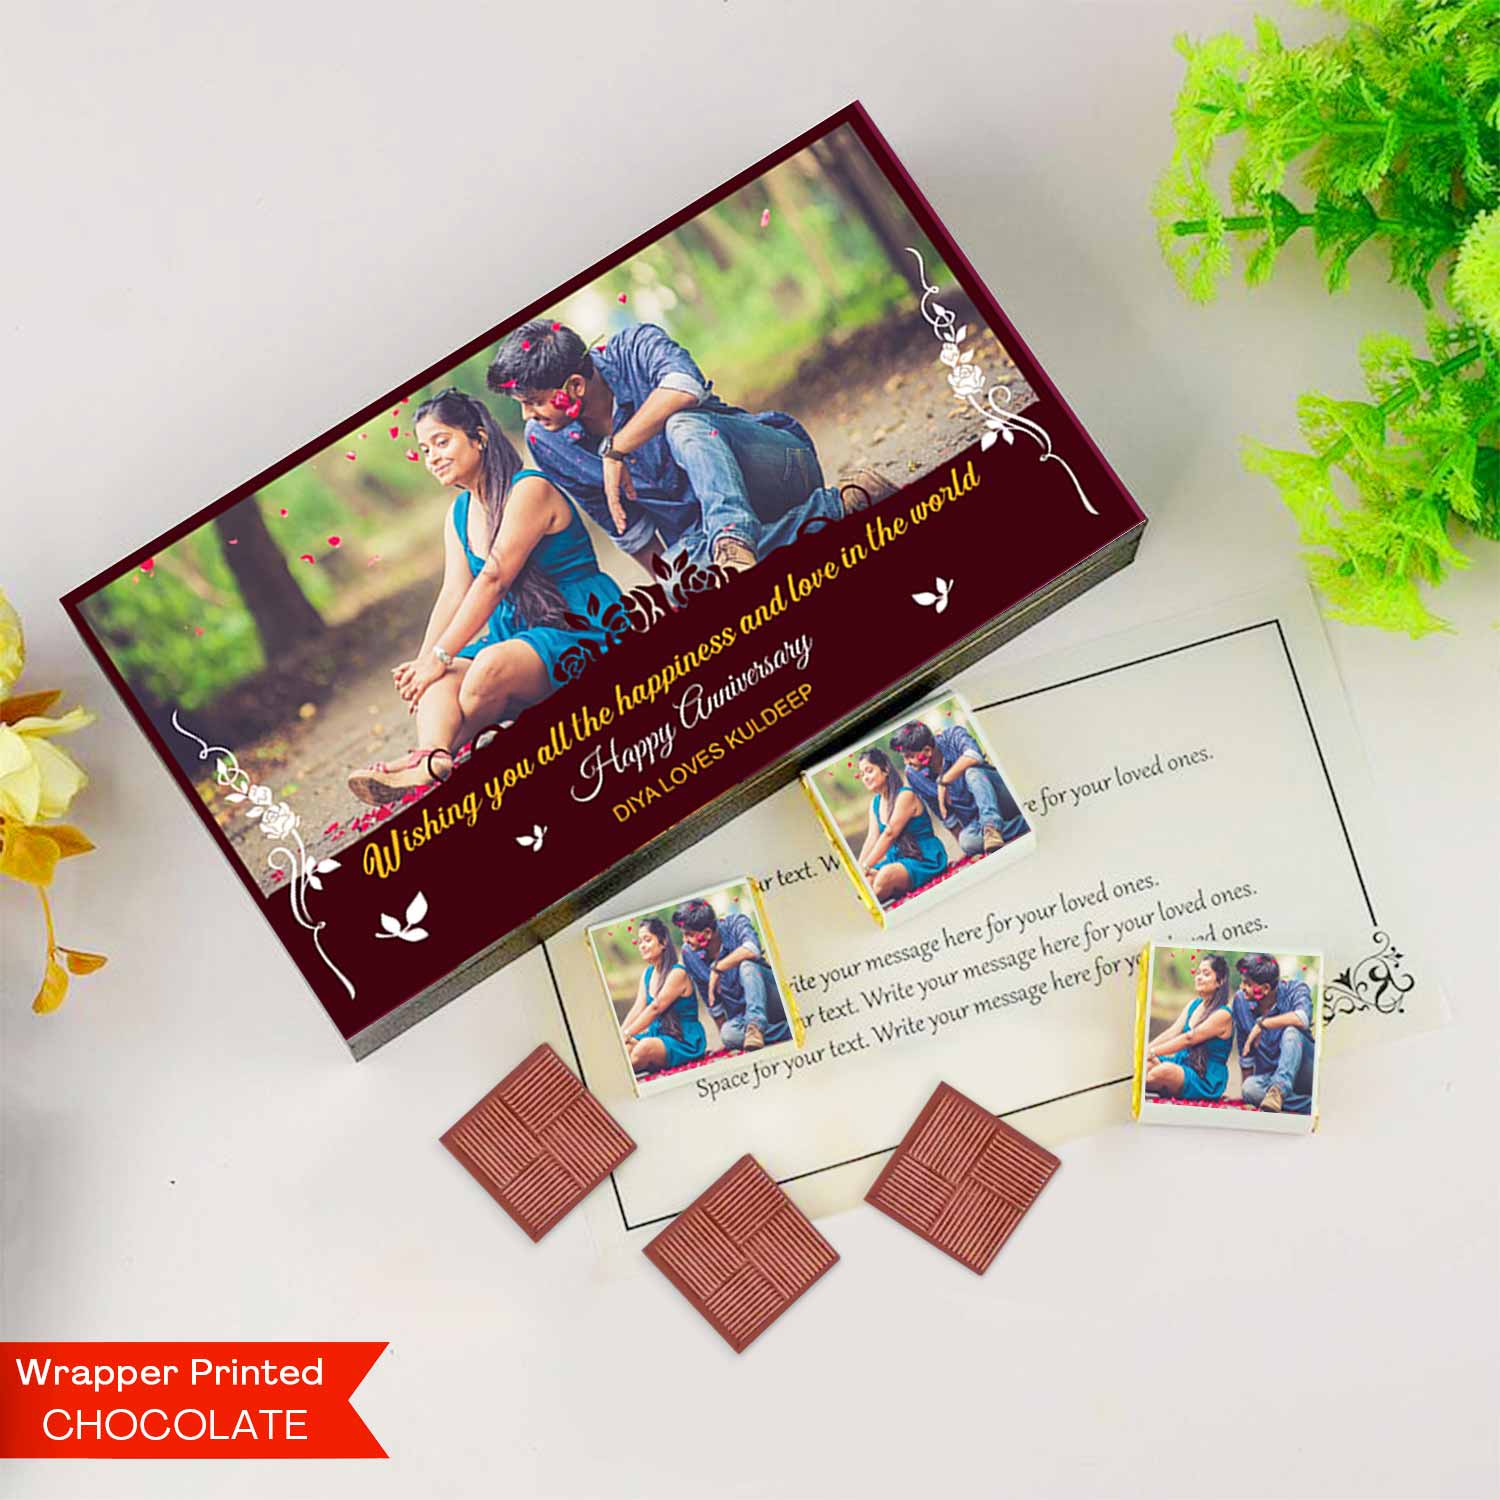 Photo printed on wrapper and box of chocolates